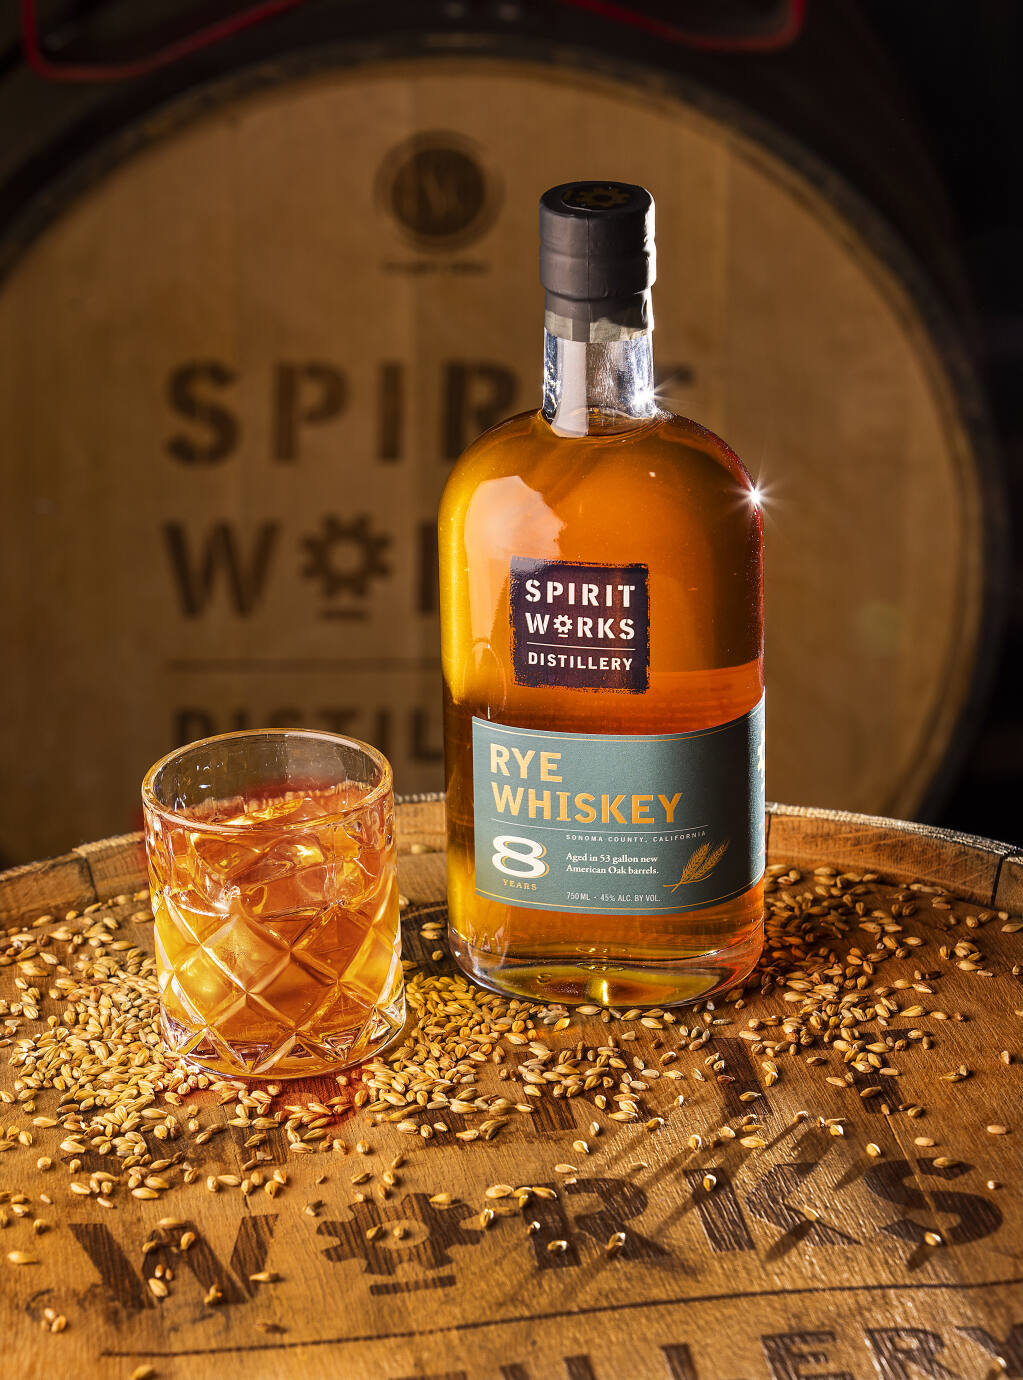 Spirit Works Distillery celebrates its 10th anniversary in Sebastopol’s Barlow with the release of an 8-year-old rye whiskey. (John Burgess / The Press Democrat)